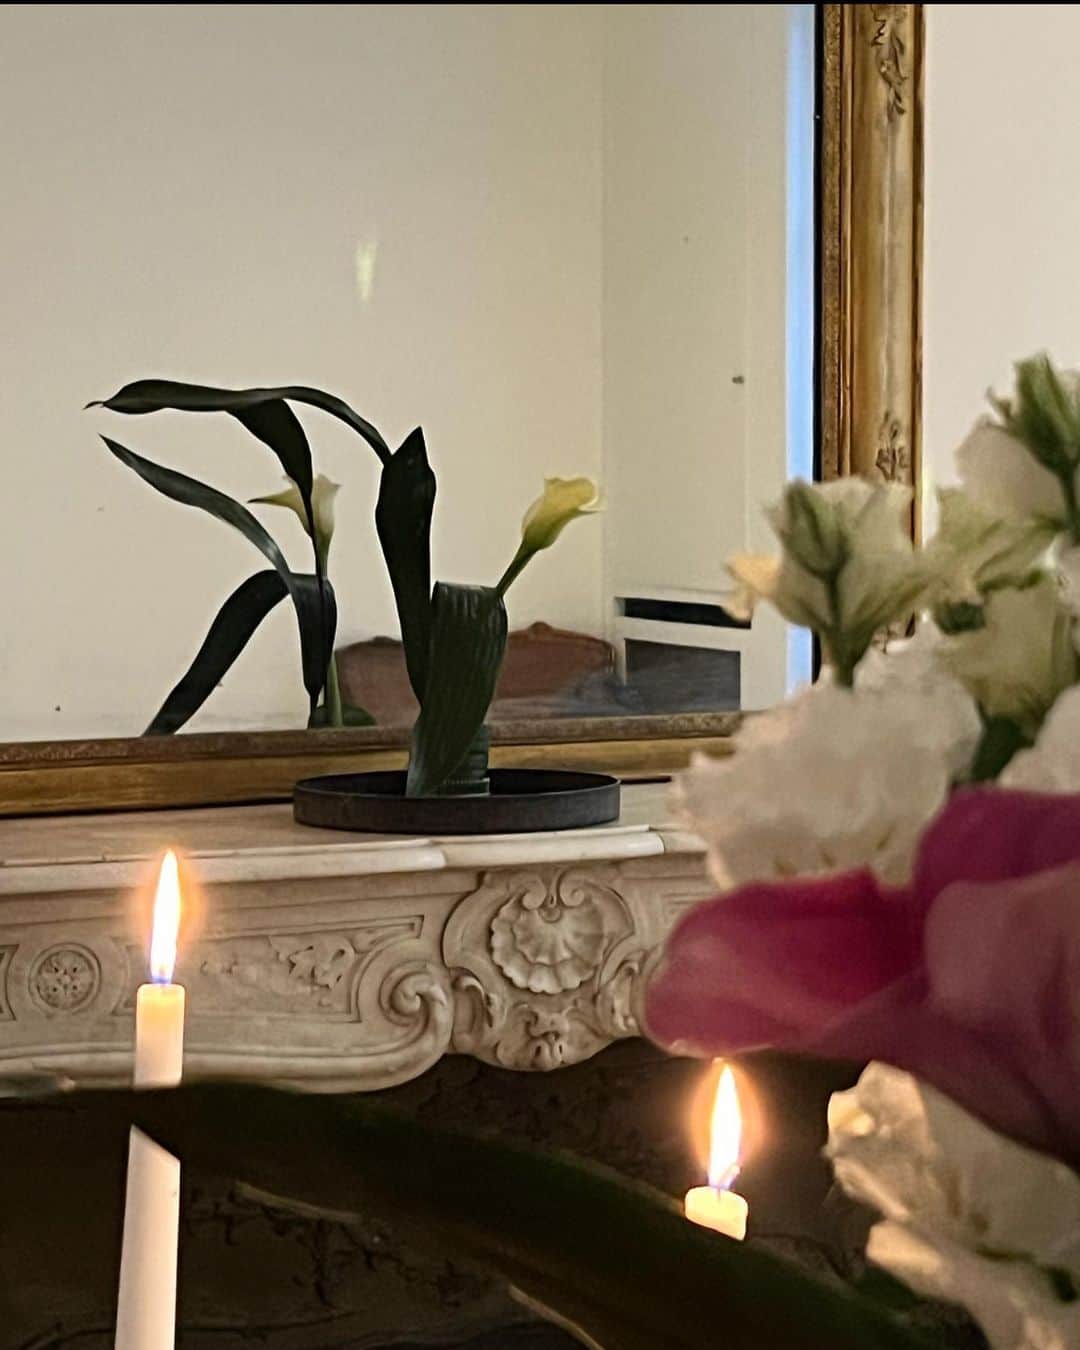 マリウス葉のインスタグラム：「Ikebana in Paris:  Ikebana is the Japanese art of flower arrangement, which involves creating stunning and minimalist floral designs that reflect the balance and harmony of nature. Ikebana is more than just arranging flowers - it is a meditative and healing practice that focuses on bringing a sense of calm, tranquility, and mindfulness to the practitioner.   In the delicate creation of Ikebana, my soul finds expression. Two chrysanthemums, each with their unique story, rest in harmony. The younger, greener flower symbolizes the vitality of my inner child, ever curious and playful. While the older, white flower represents the wisdom of my past self, a reminder of the lessons learned and the journey taken.  The leaf, once whole, is now halved. A deliberate cut, separating what was once a singular entity. One side curls inwards, as if sheltering and protecting the important parts in me, while the other arches outward, letting go of what I do not need anymore. Through this act, I choose which energies to keep and which to release, carefully tending to my inner garden.  As I arrange each stem and petal, I am reminded of the beauty in finding balance. The ebb and flow of life, the constant change and growth. And so, I pour my heart into this creation, a reflection of my soul's journey towards harmony and self-discovery.  Thank you @zizisensei for giving me this opportunity and @georgerootnyc for joining me 🤍」